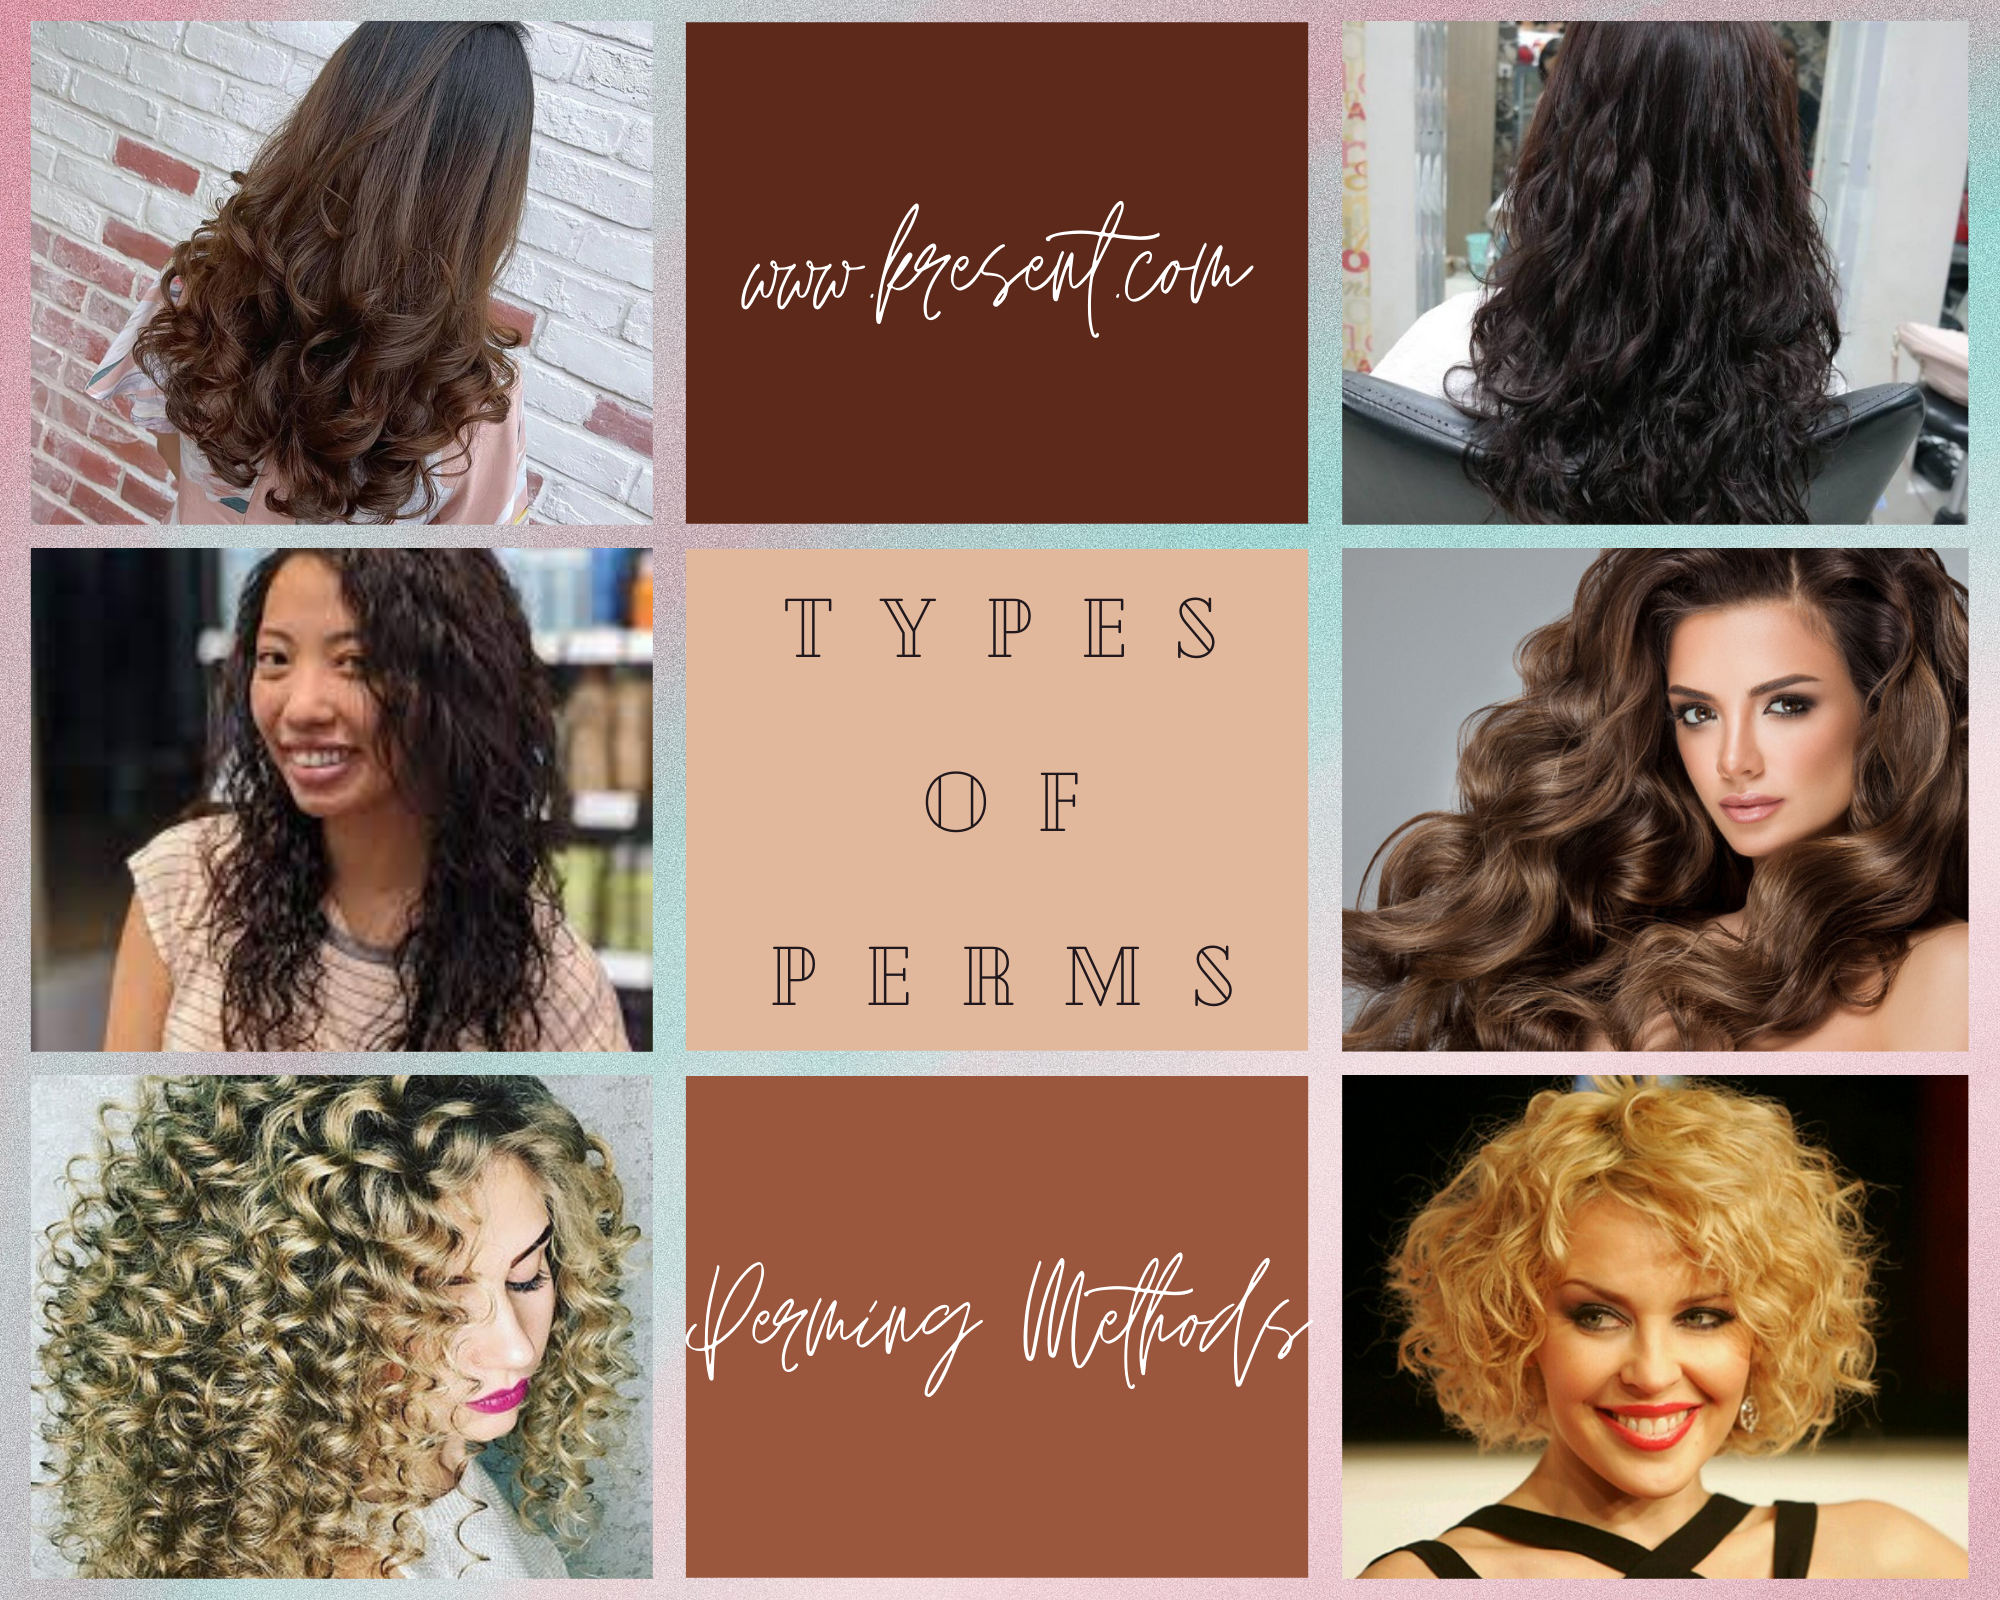 6 Types Of Perms And Perming Methods To Try - Types Of Hair Perms – Fashion